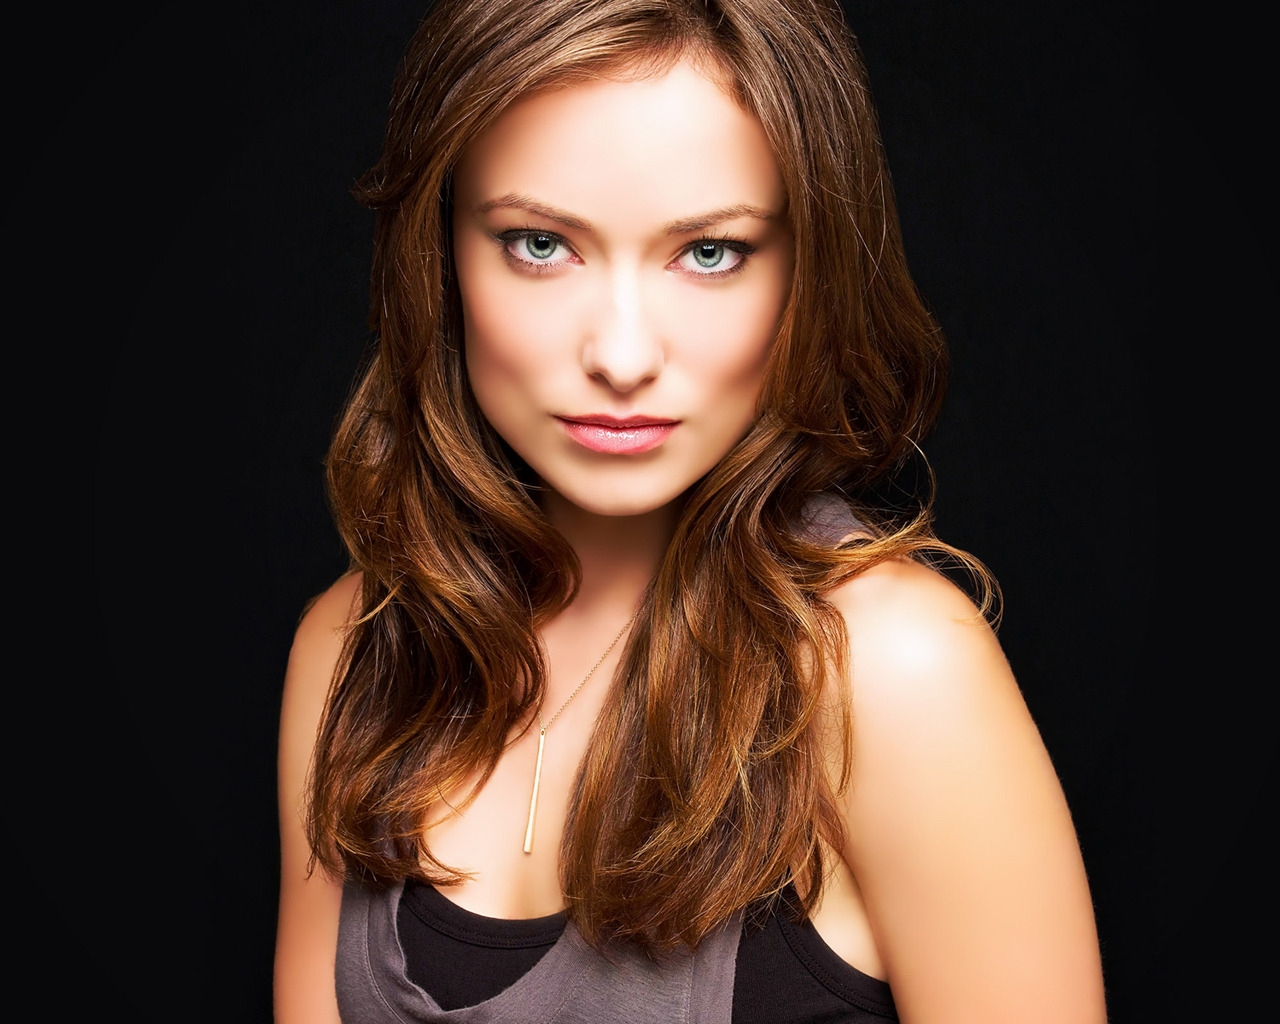 Olivia Wilde Look for 1280 x 1024 resolution